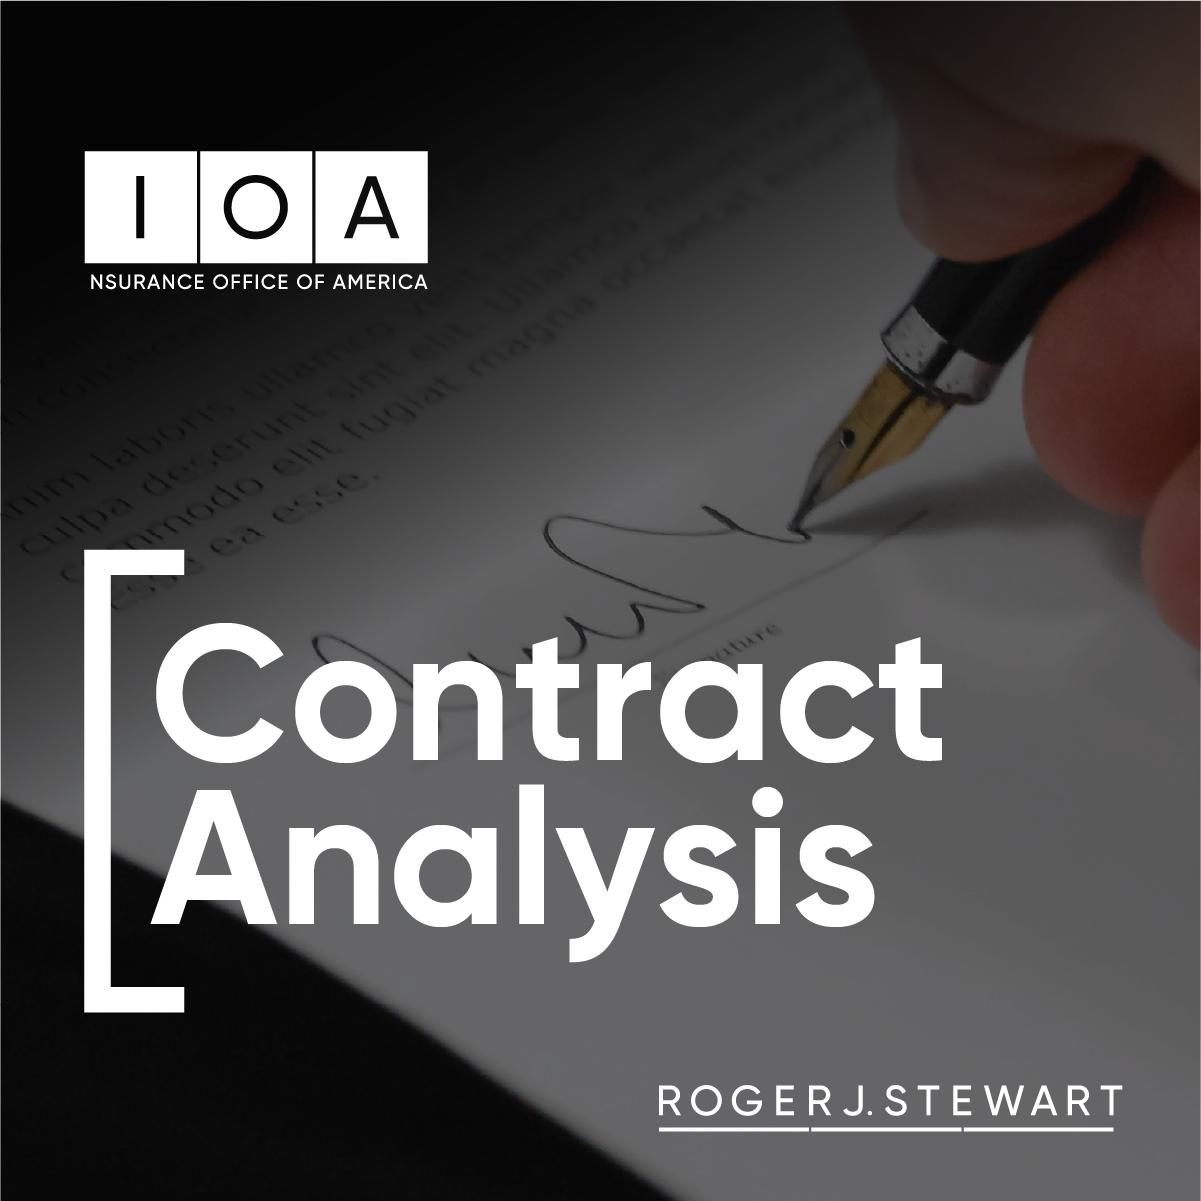 Contract Analysis and Review